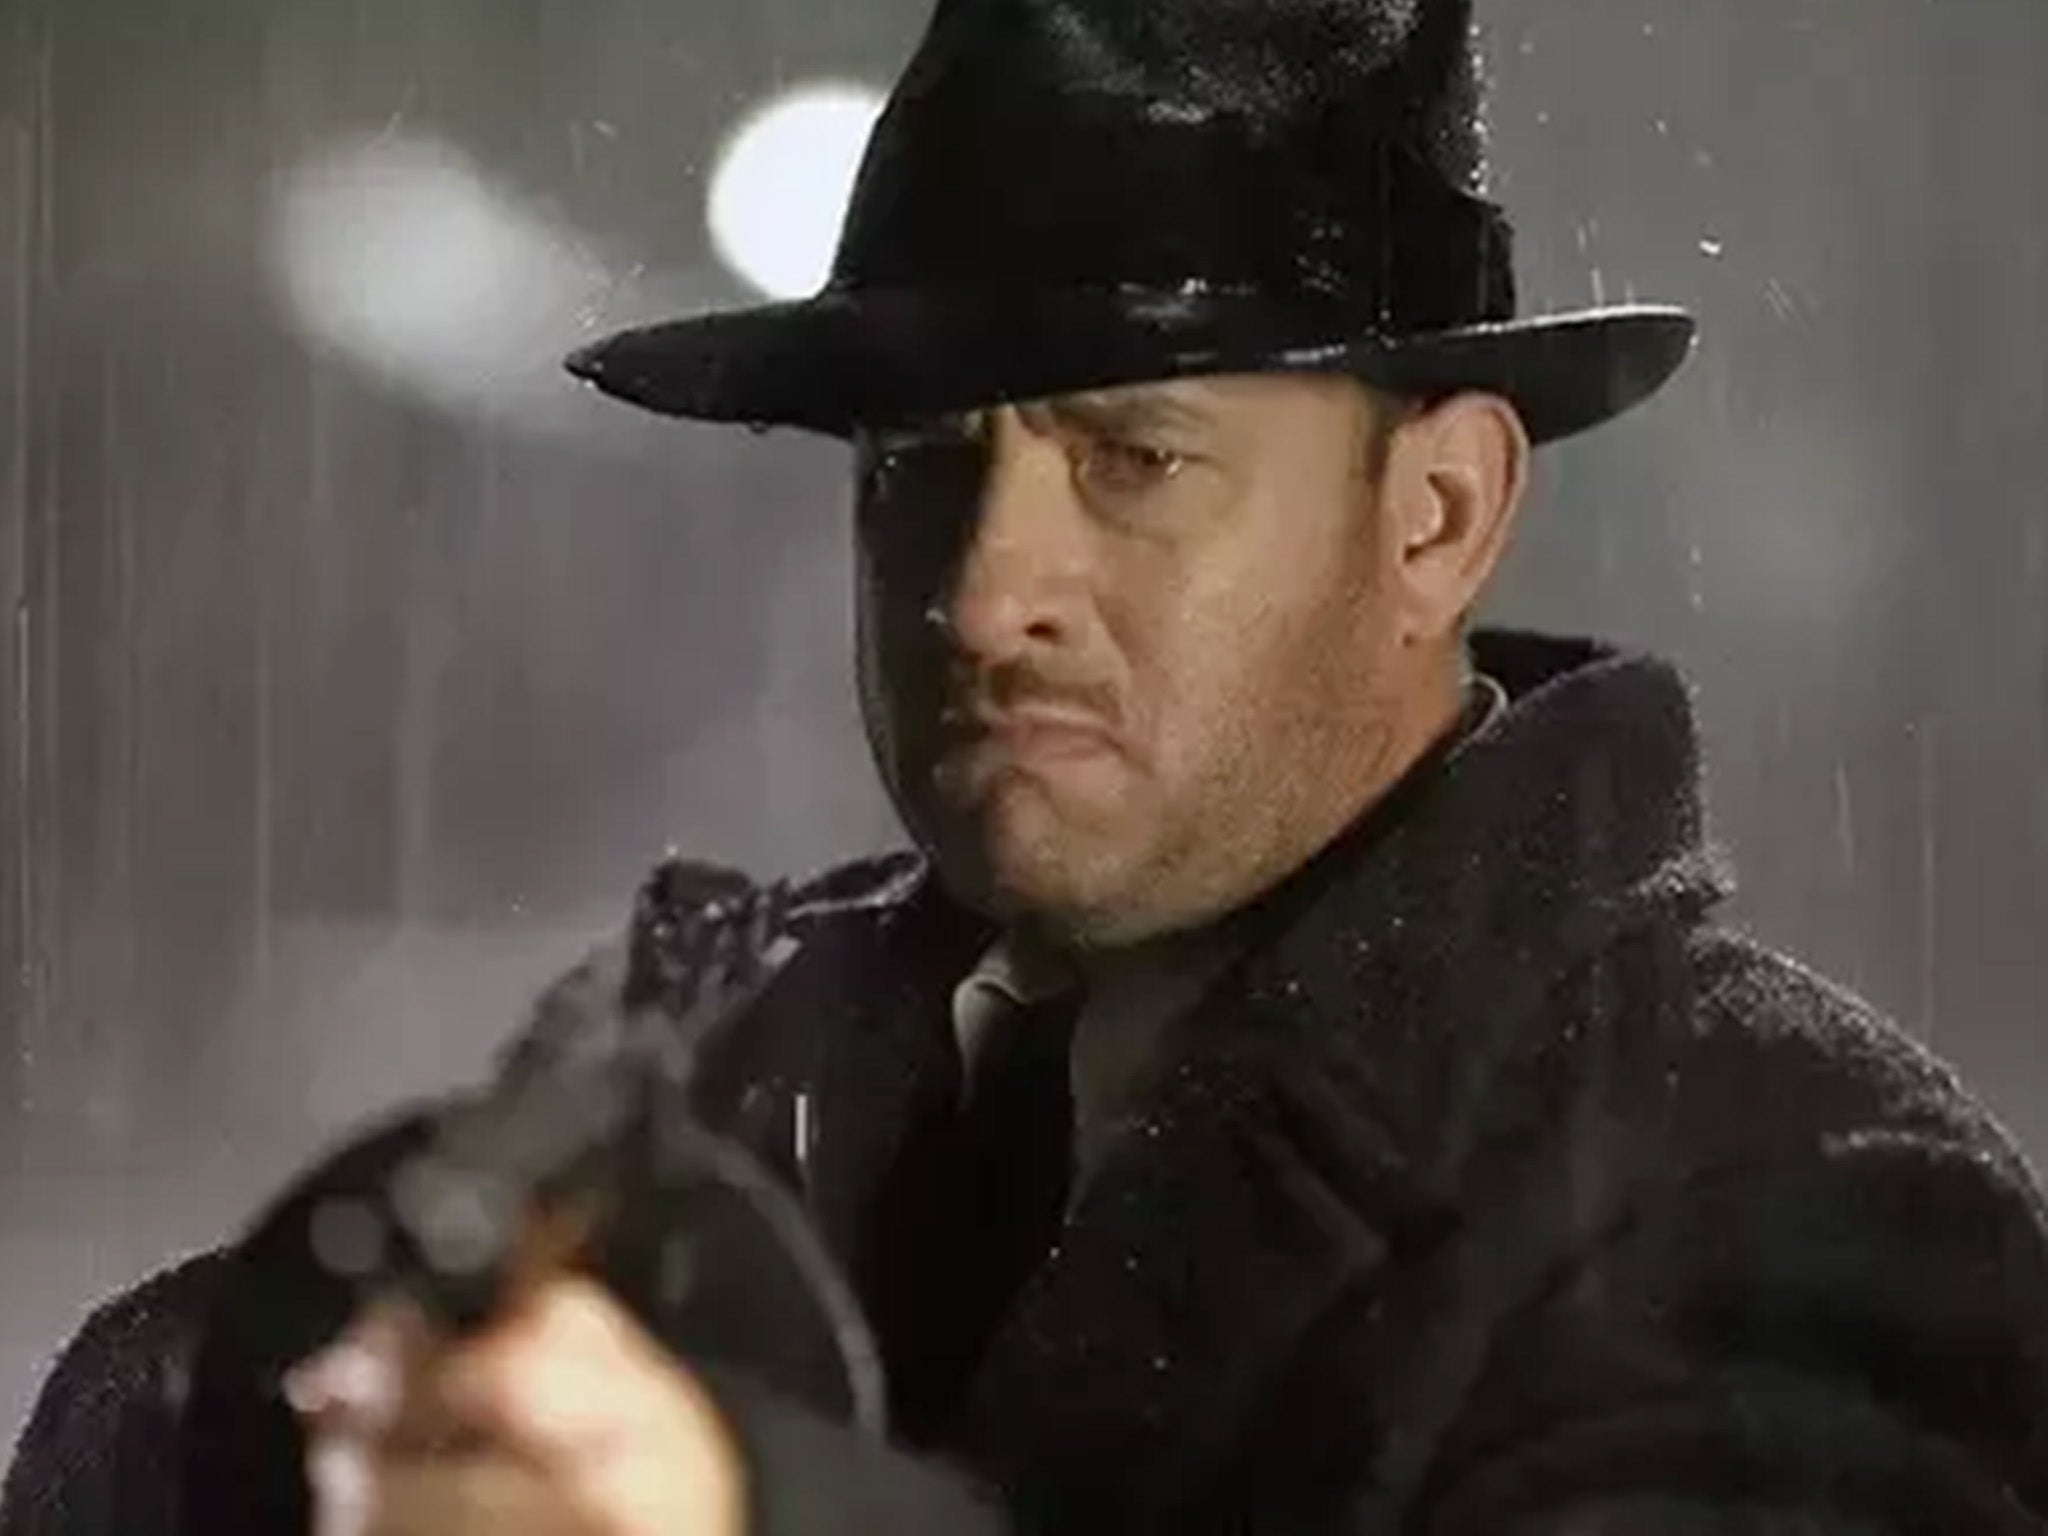 Tom Hanks in ‘Road to Perdition’, which is leaving Netflix